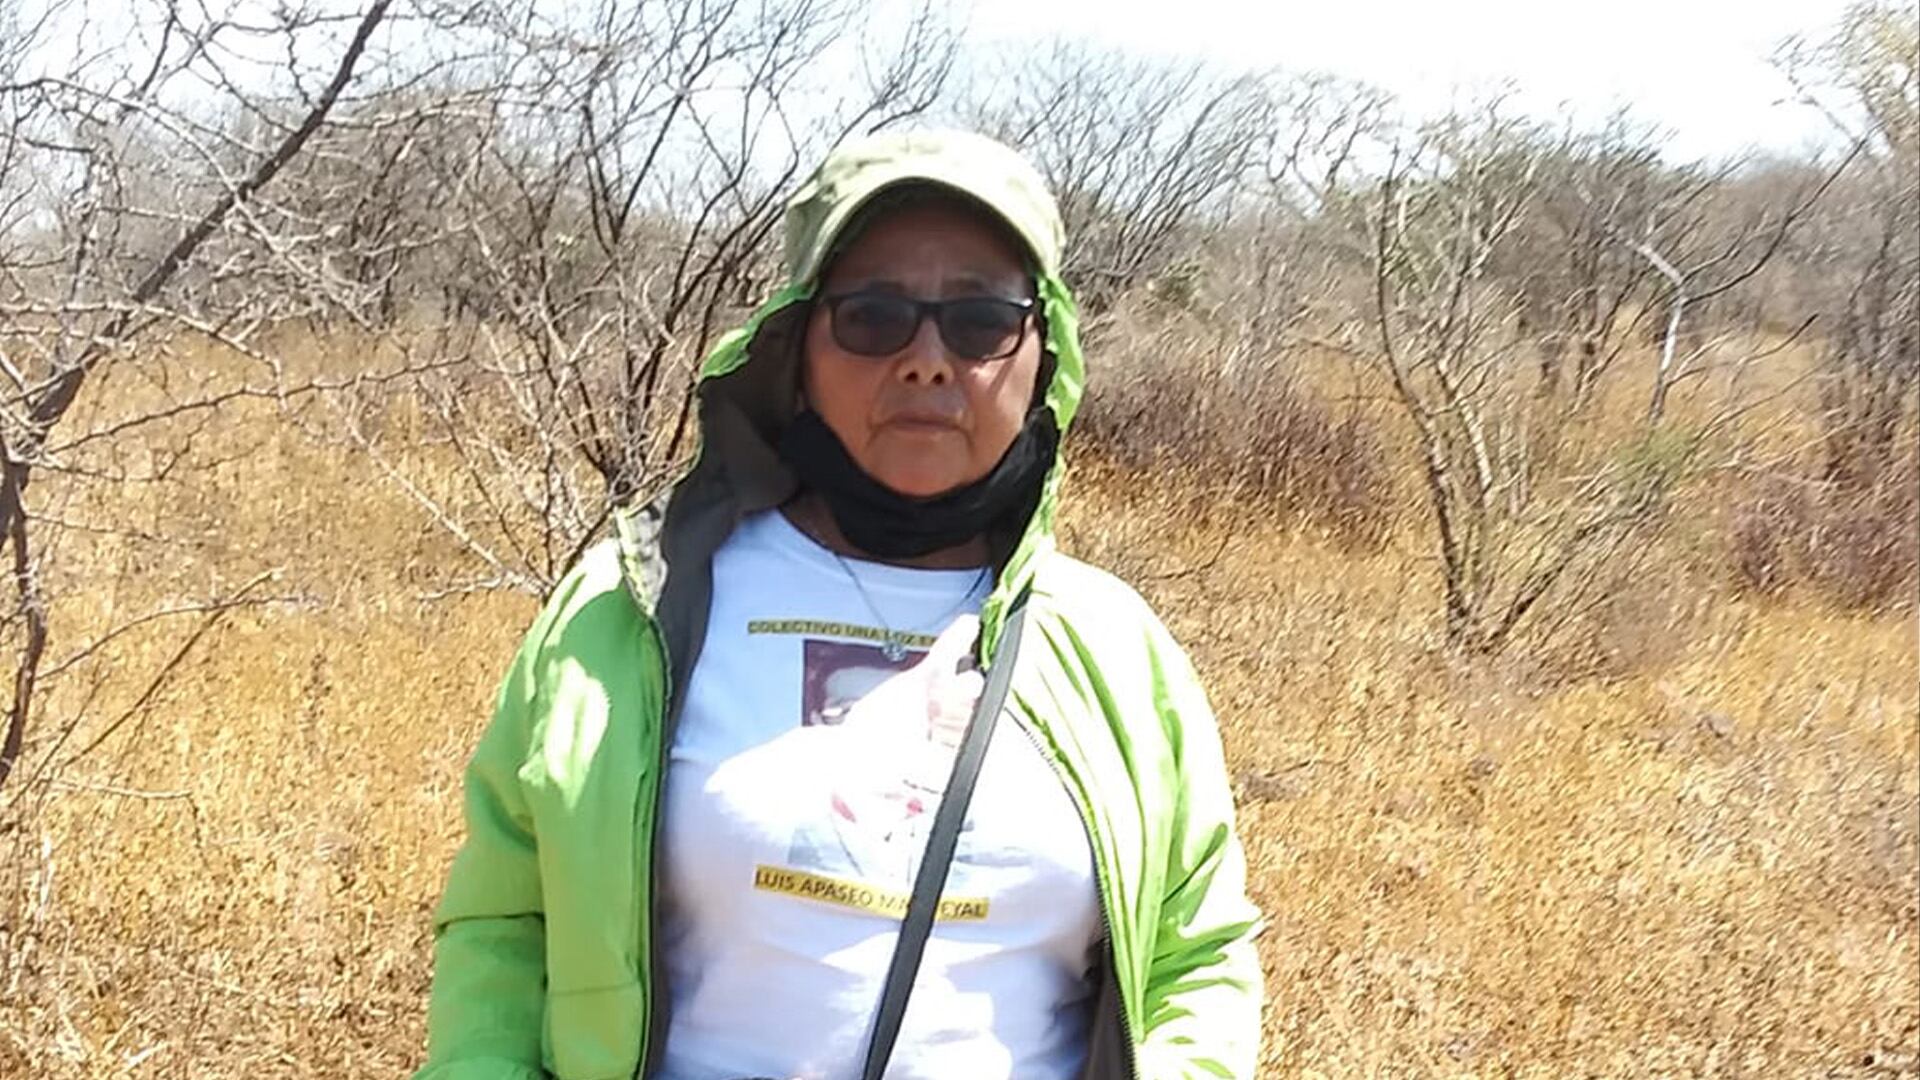 Teresa Magueyal during a search, an image taken from her social media account.